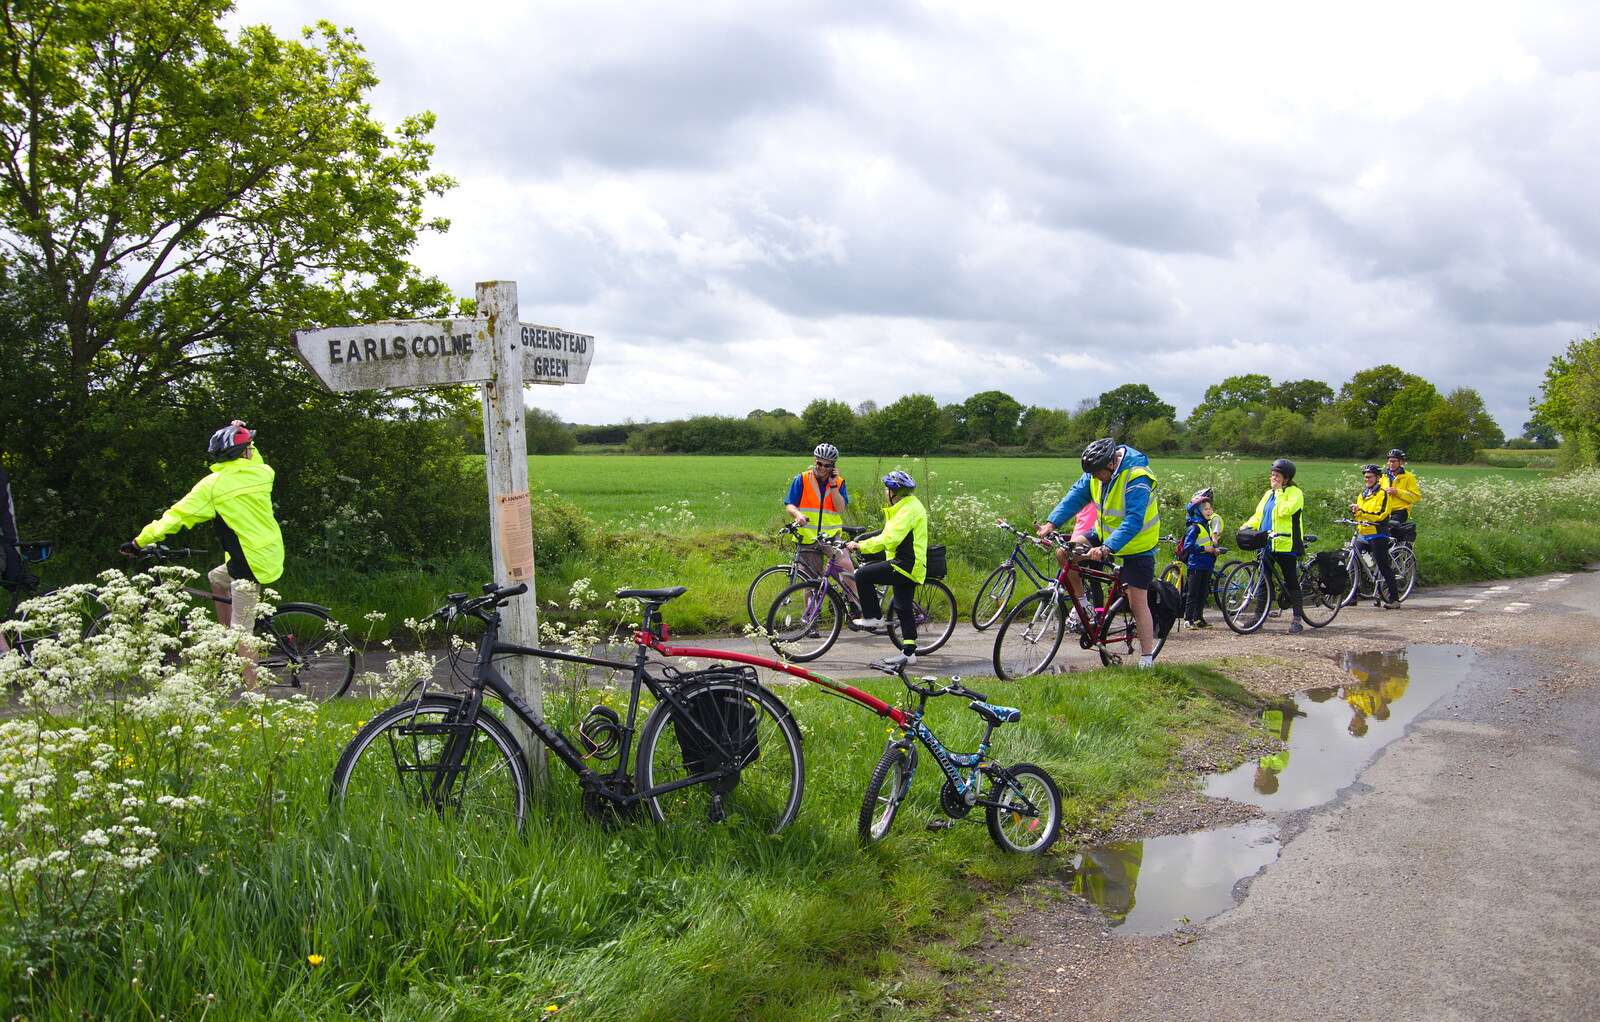 Between Greenstead Green and Earl's Colne from The BSCC Bike Ride 2019, Coggeshall, Essex - 11th May 2019